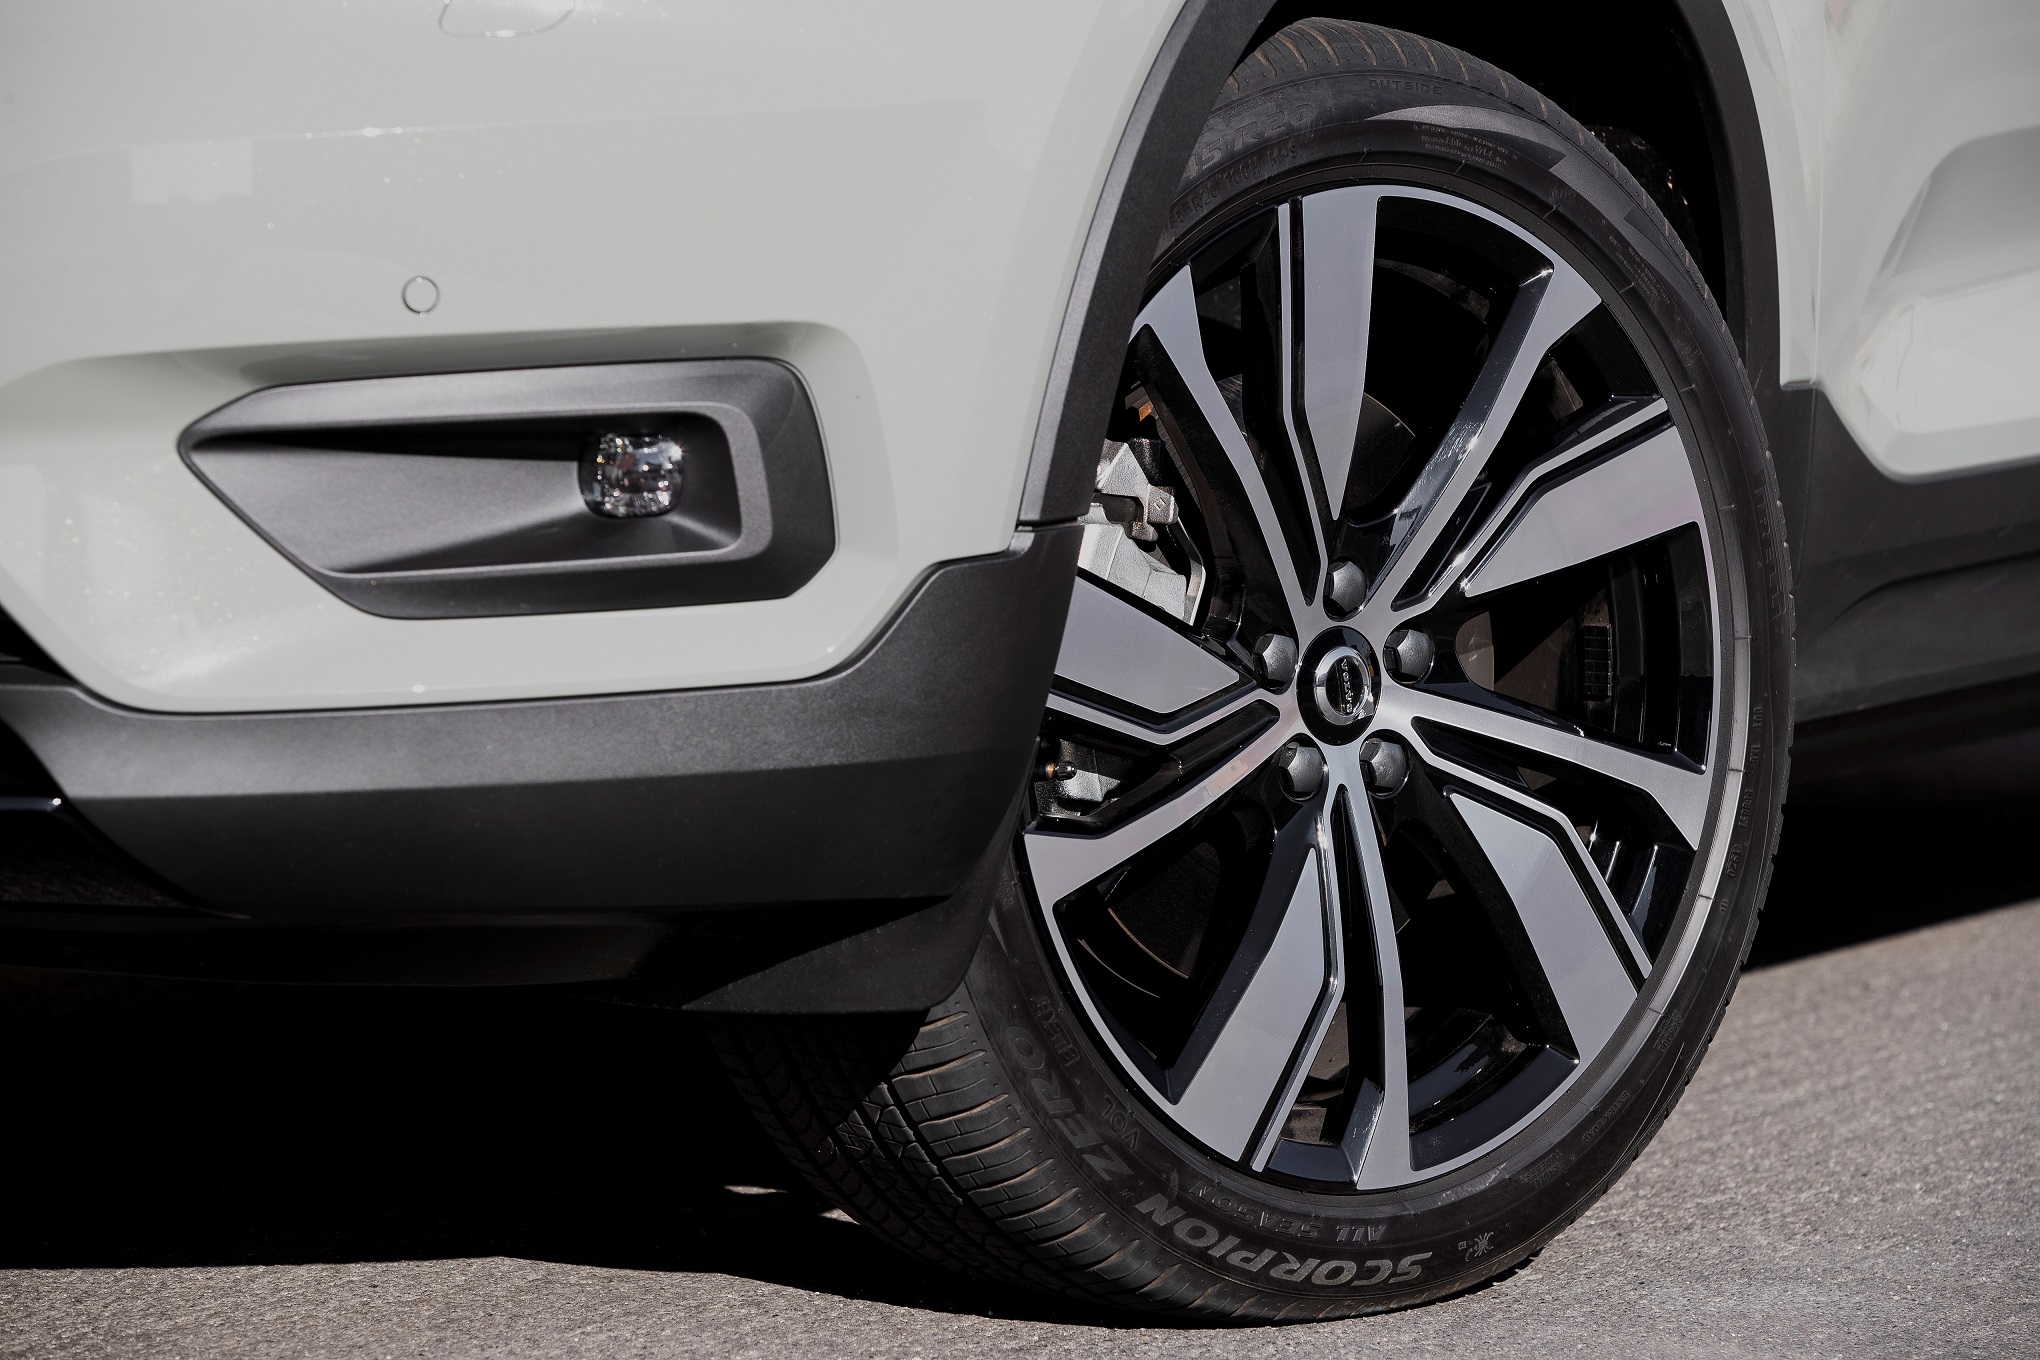 XC40 tire and wheel